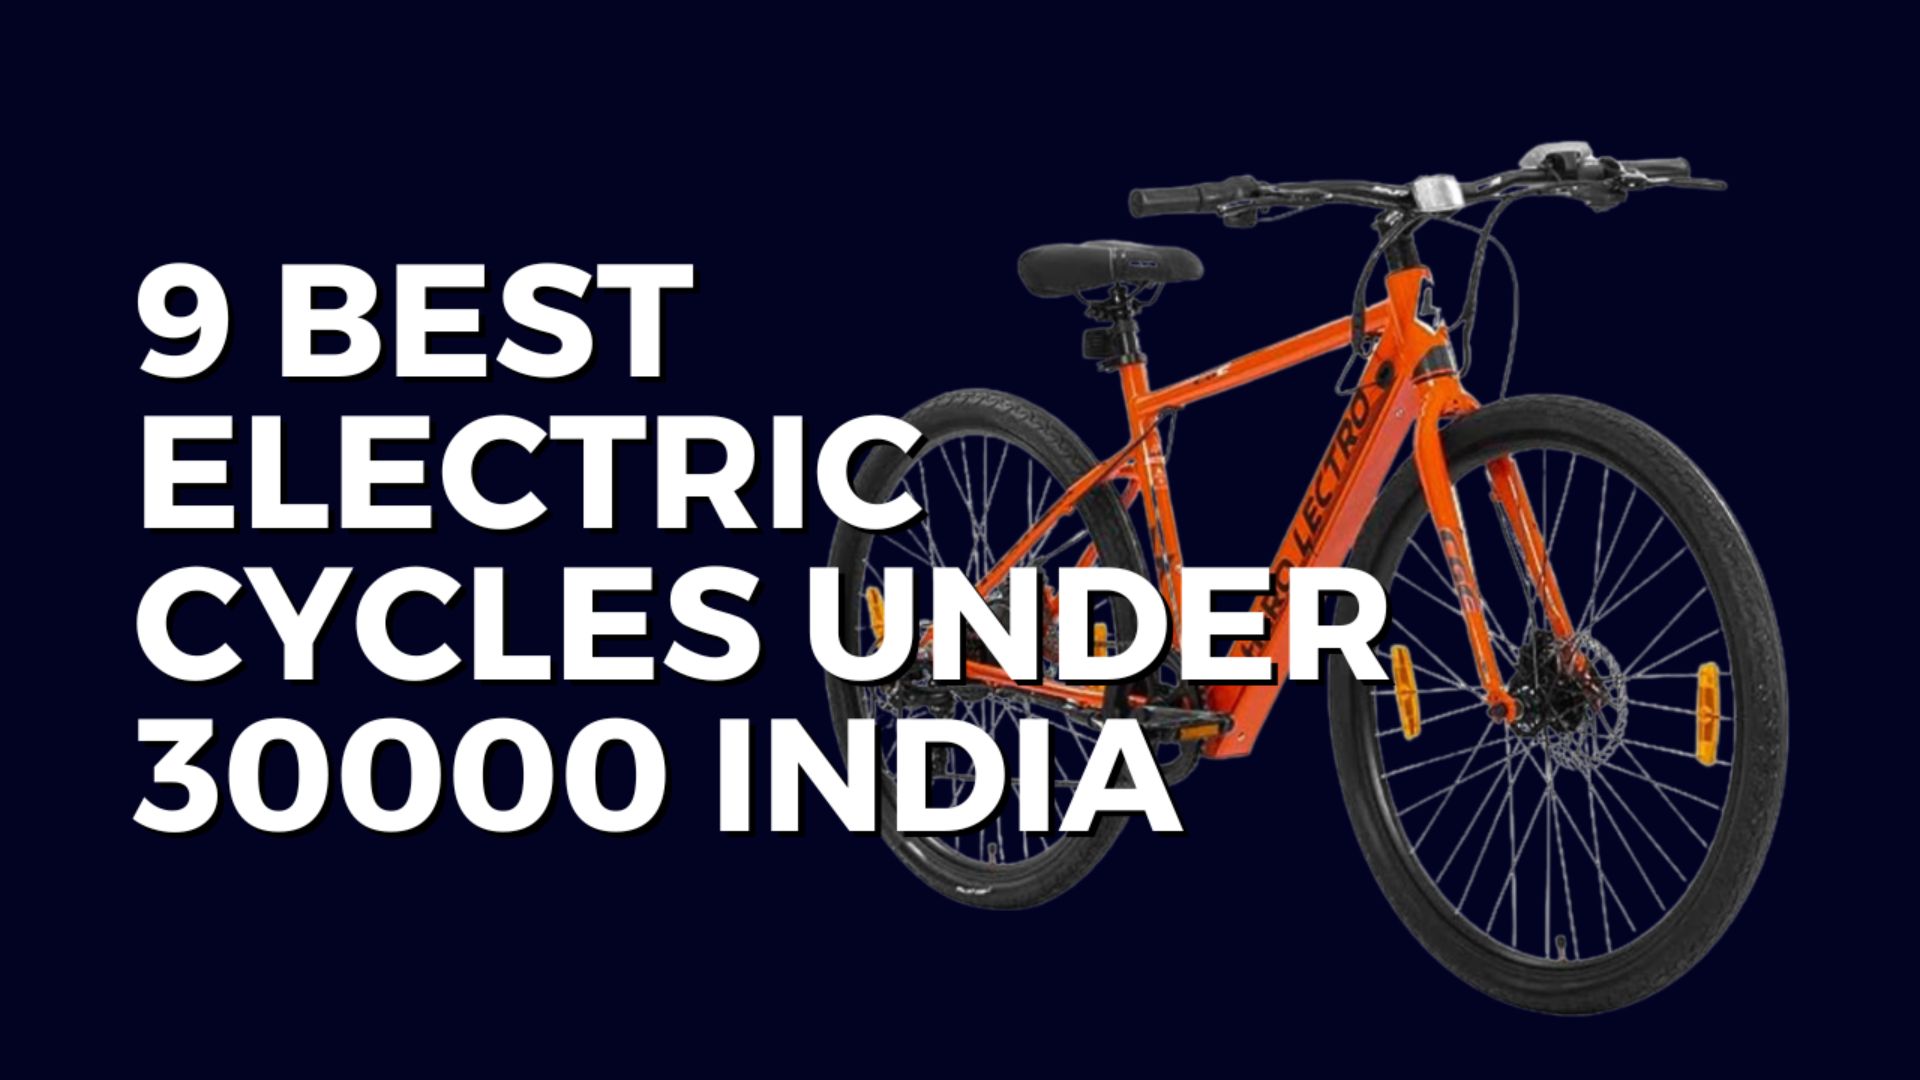 9 Best Electric Cycles Under 30000 India